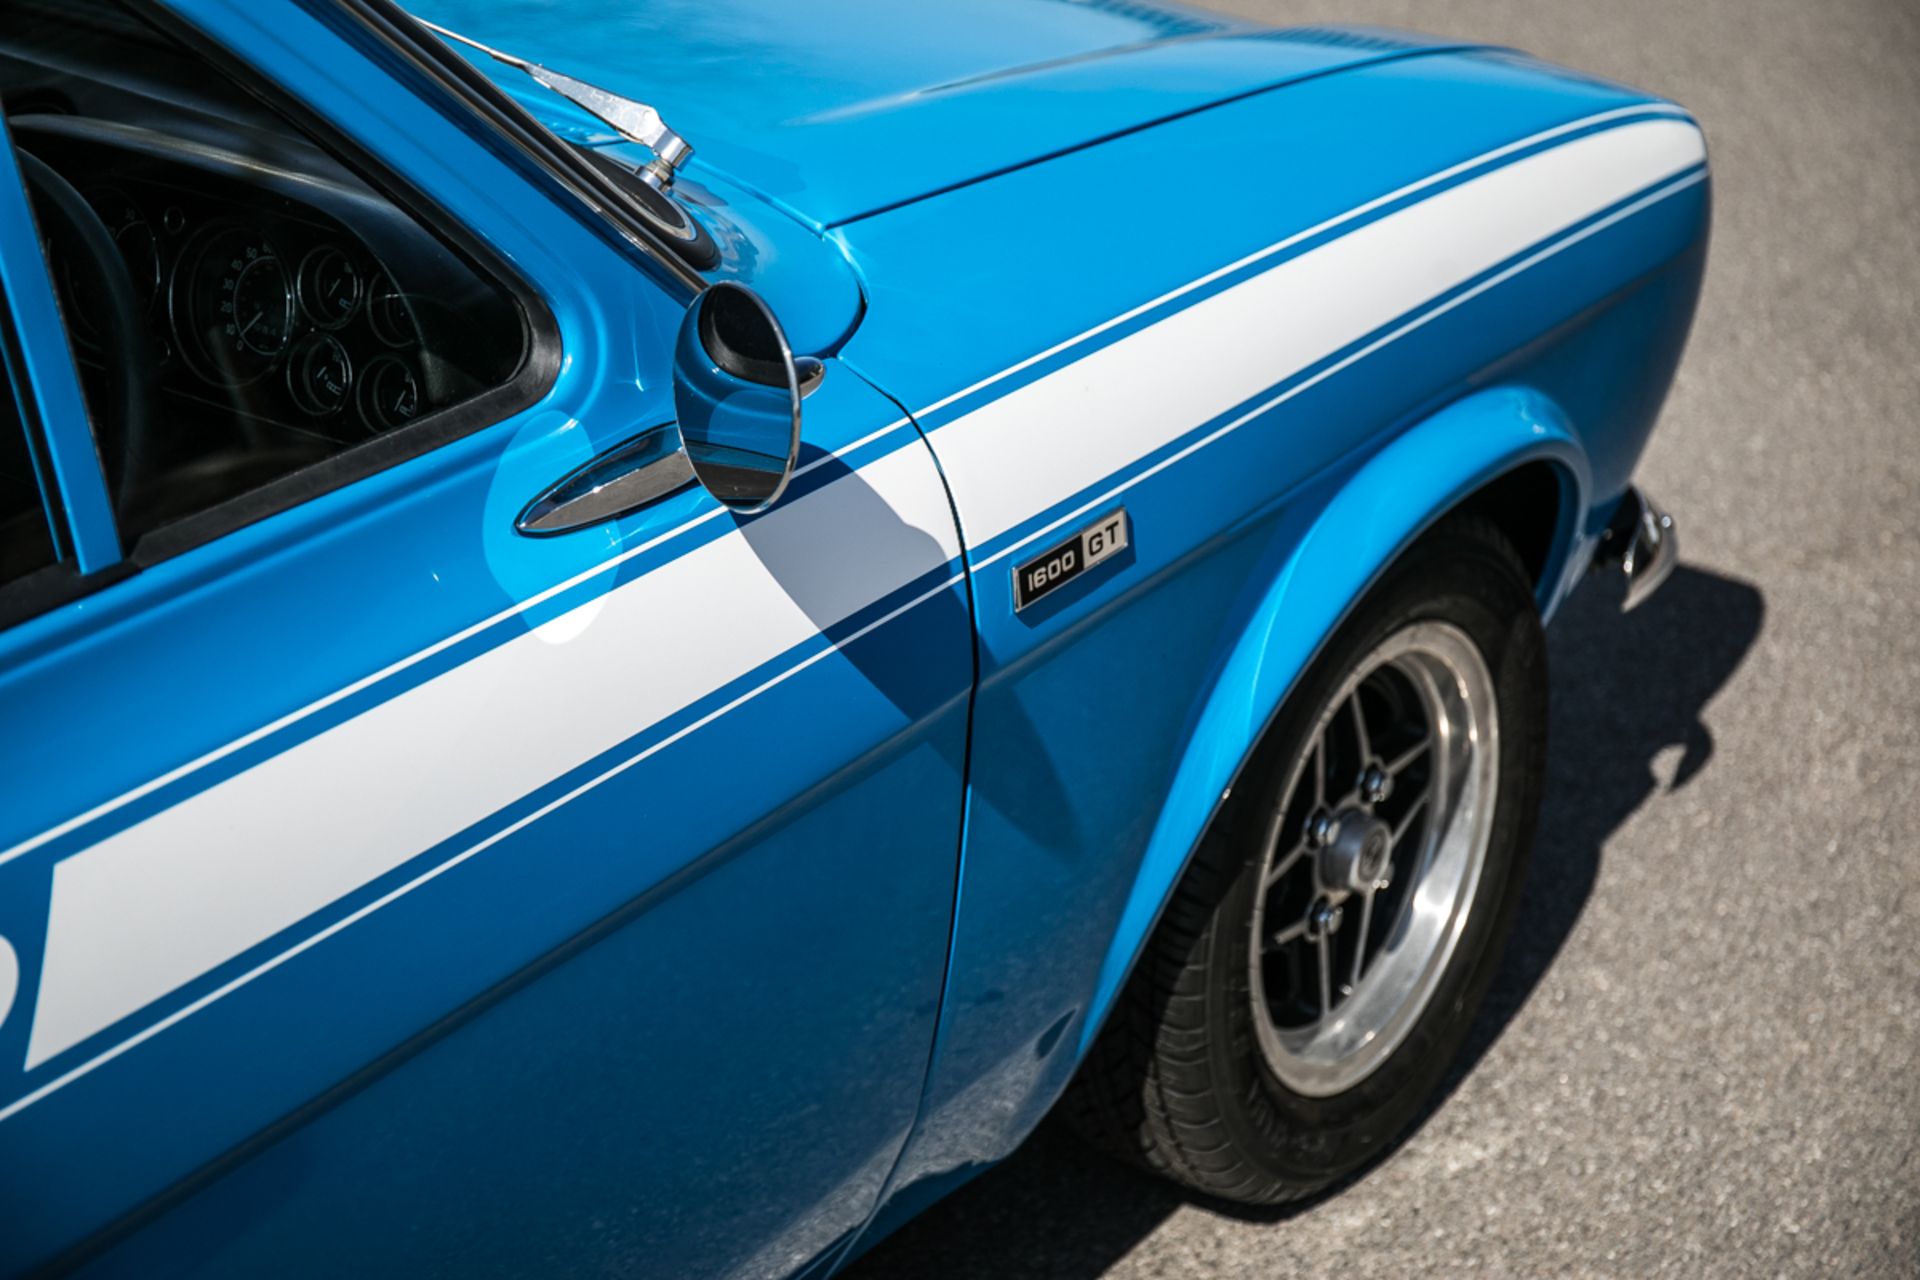 1973 Ford Escort 1600 Mexico - Image 17 of 20